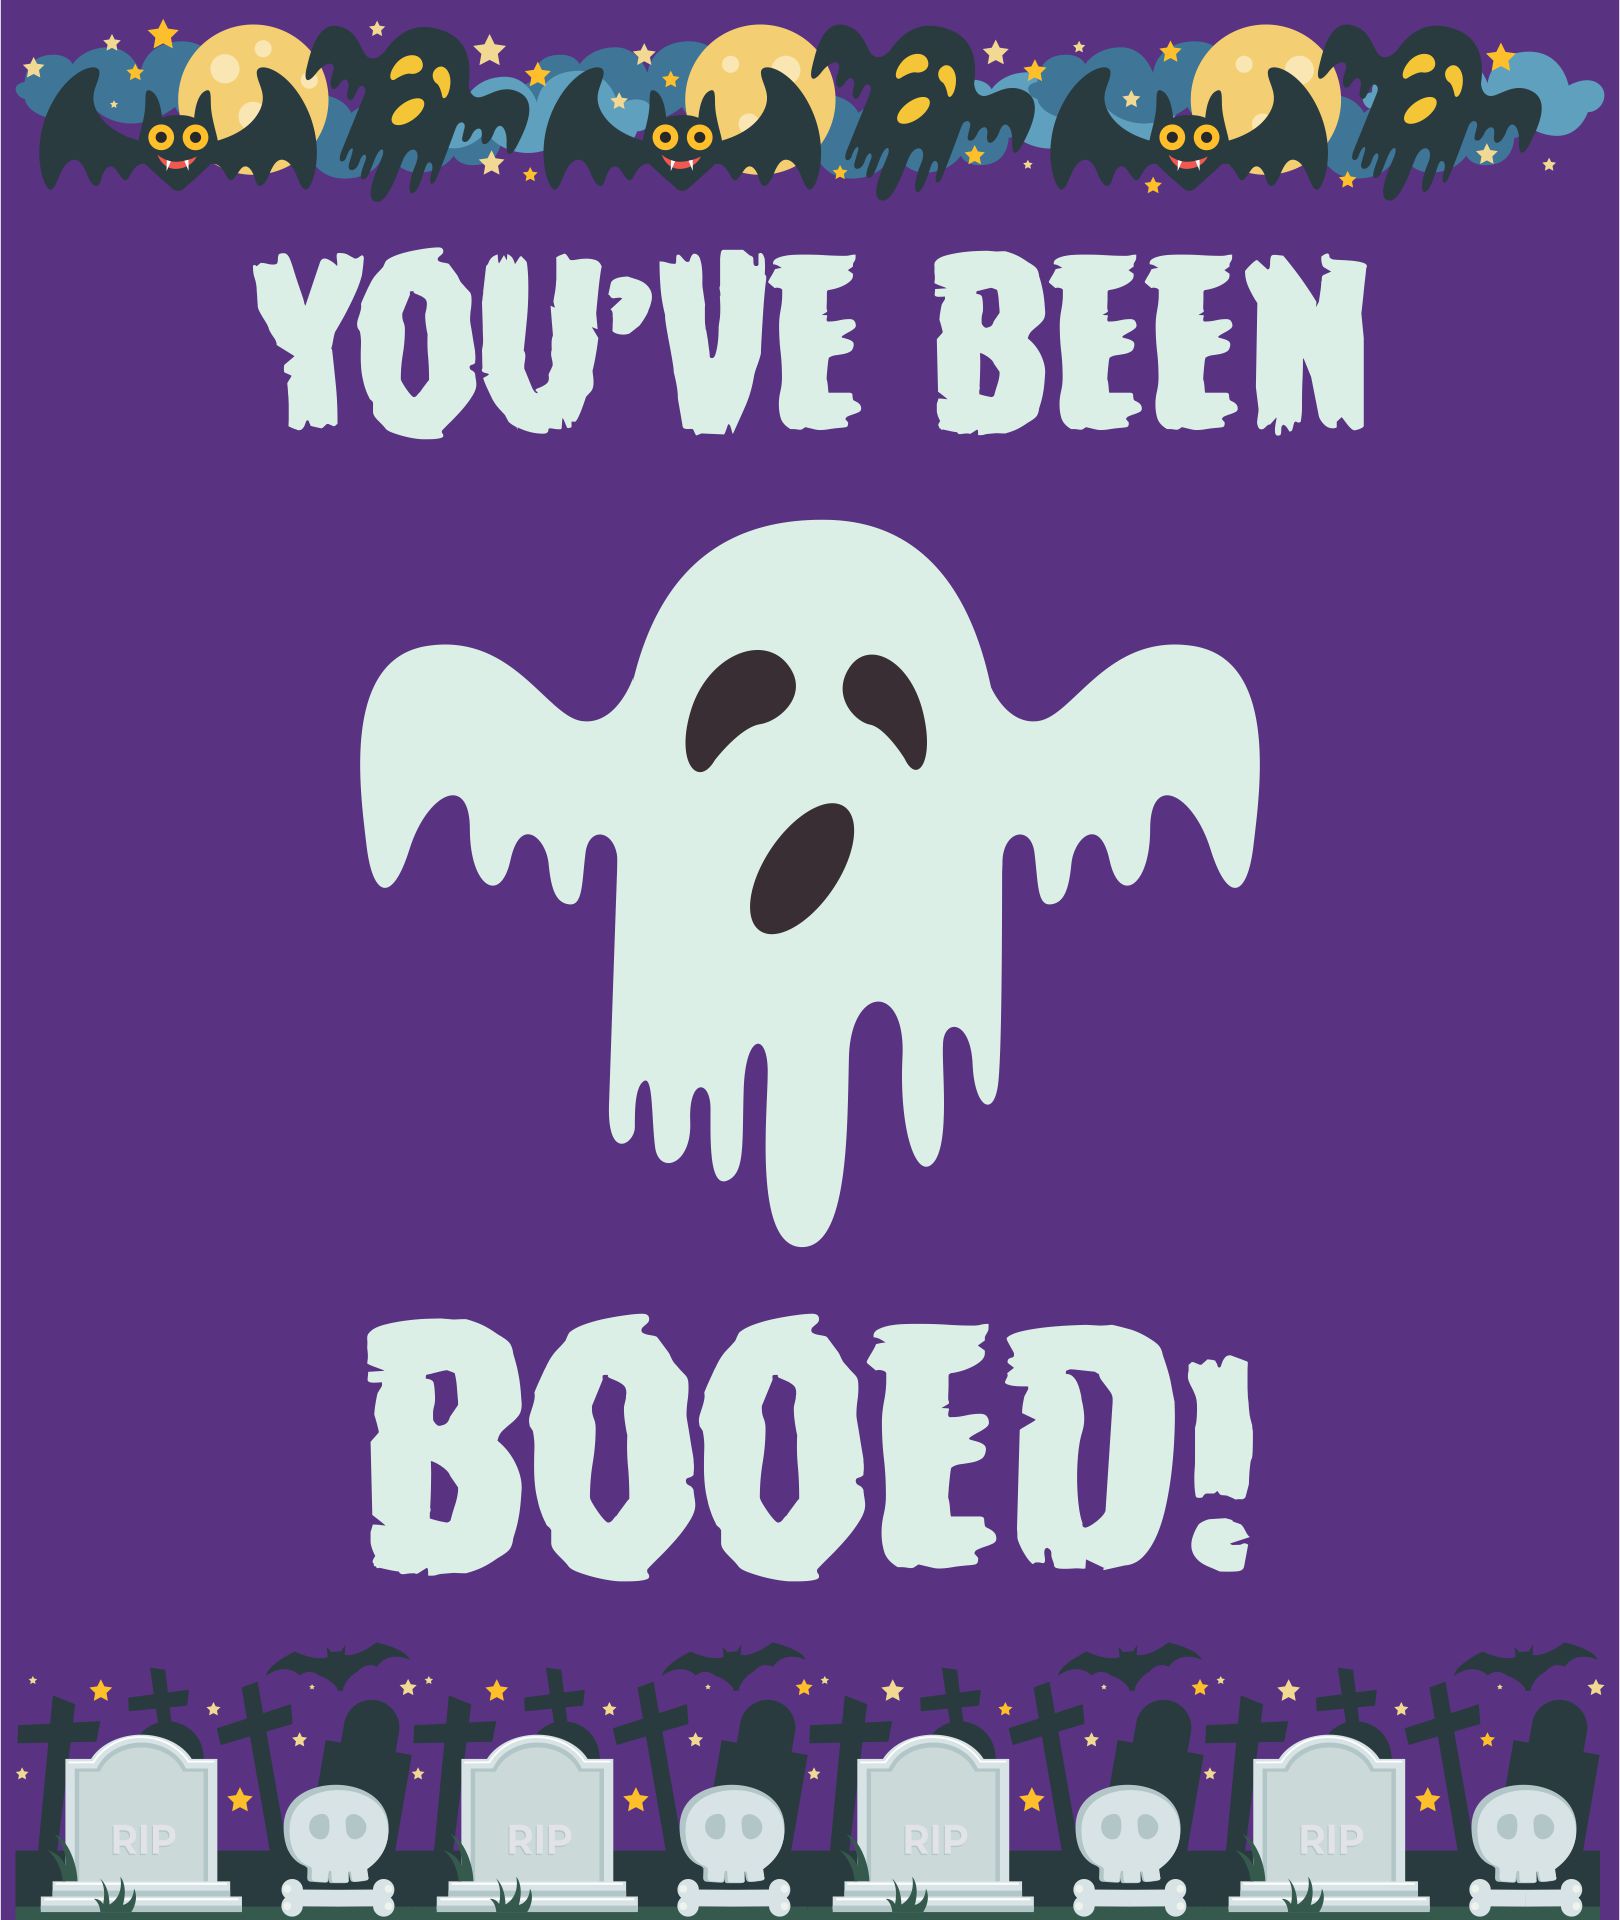 6 Best Images of Halloween Booing Printables You #39 ve Been Booed Sign